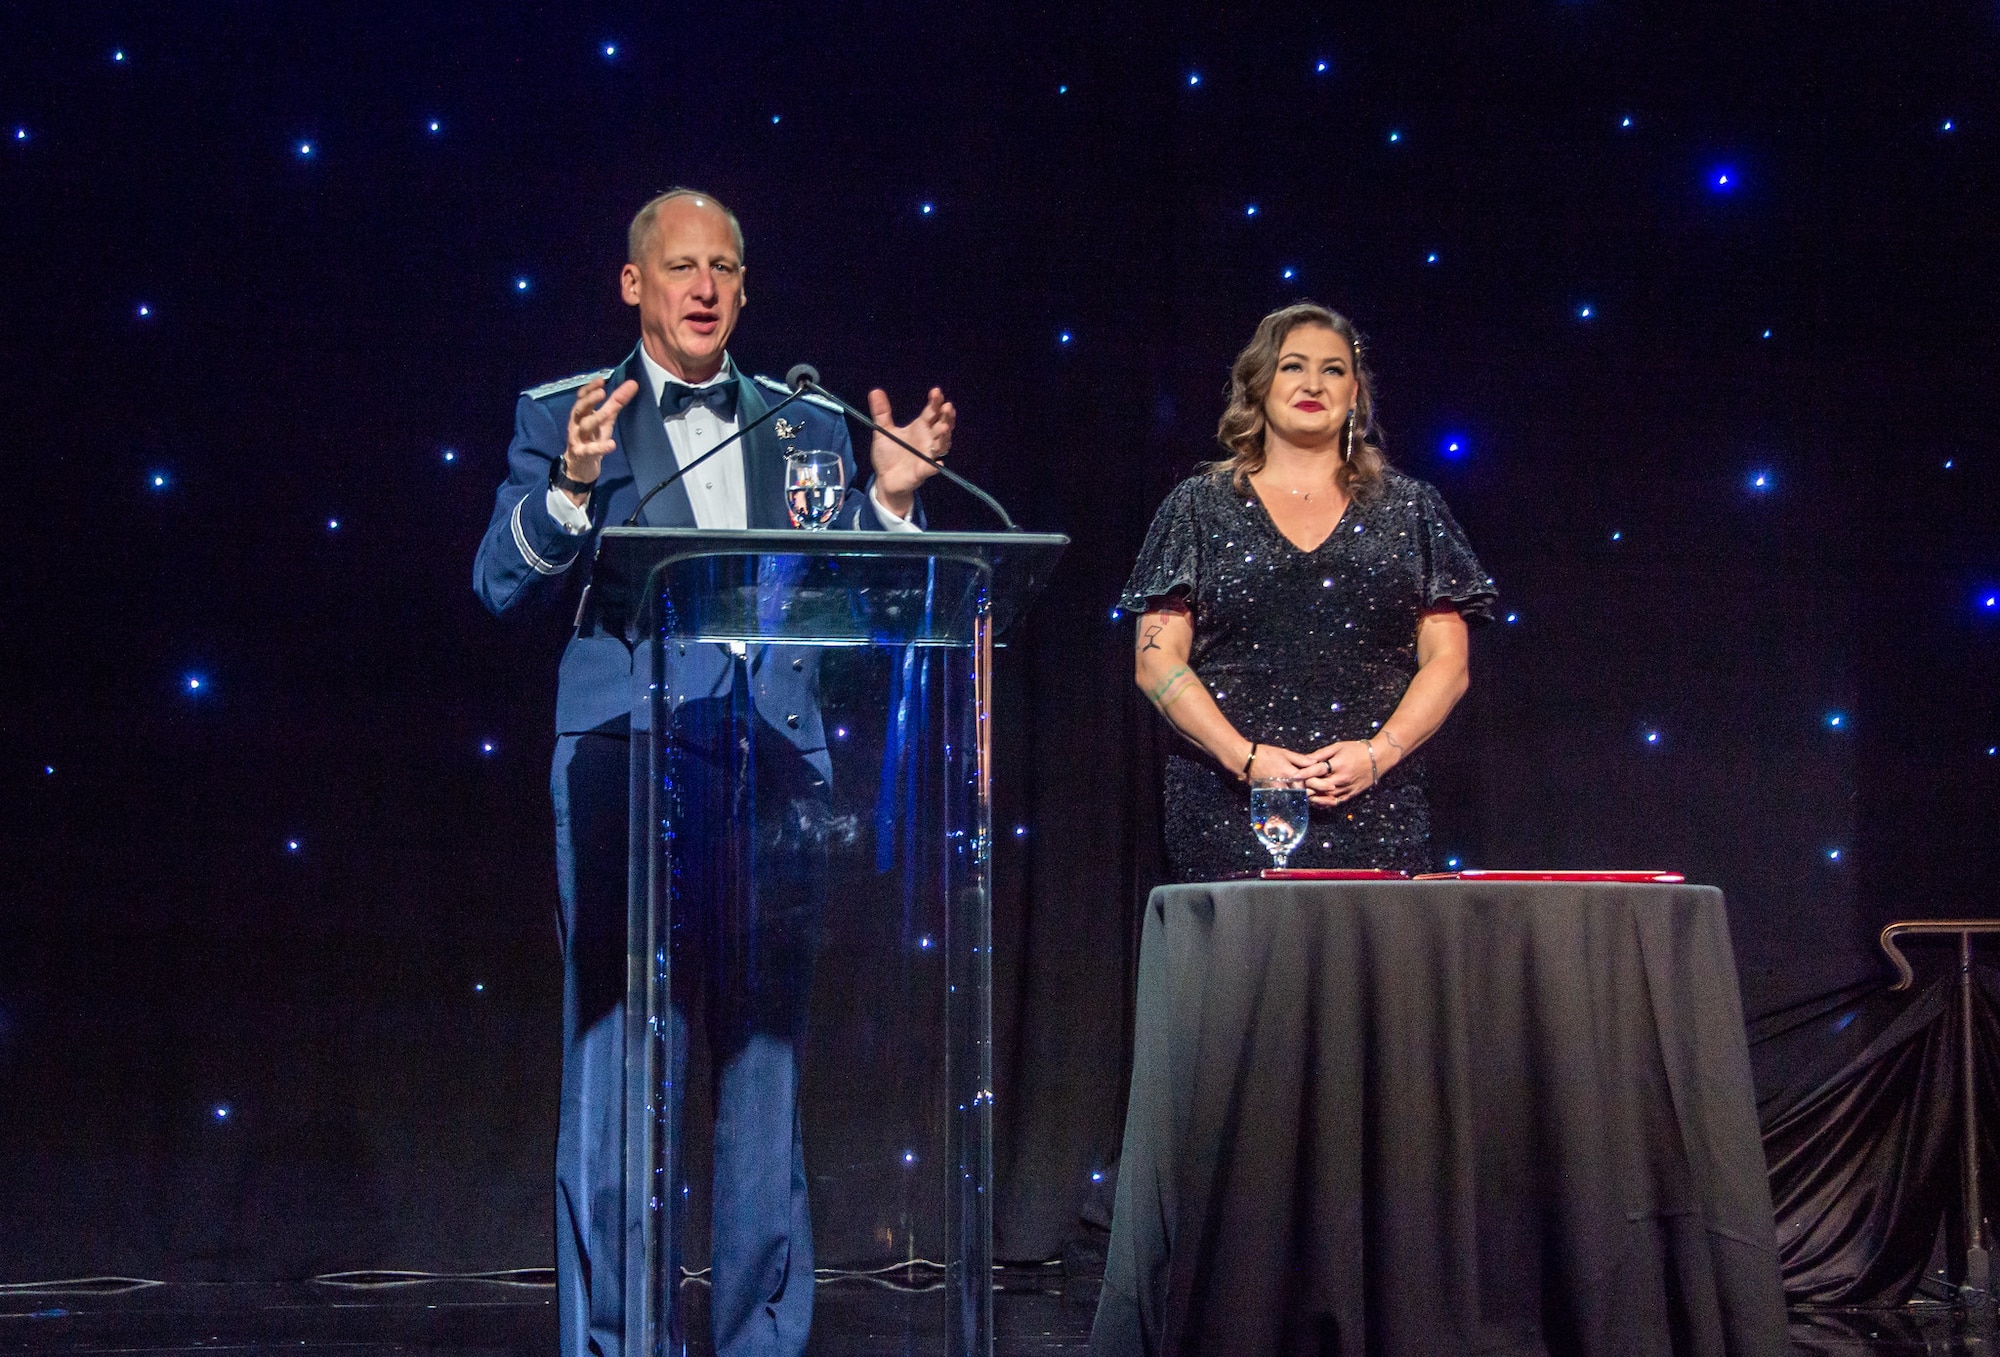 Lt. Gen. Michael Guetlein, SSC commander, (left) congratulates Sage Andorka, deputy branch chief and chief engineer, SSC Cross Mission Data, representing Fight Tonight 2023’s winning team for their Allied Exchange Environment innovation submission, at the Space Force Ball, Nov. 17 in Beverly Hills, Calif. (U.S. Space Force Photo by Van Ha)